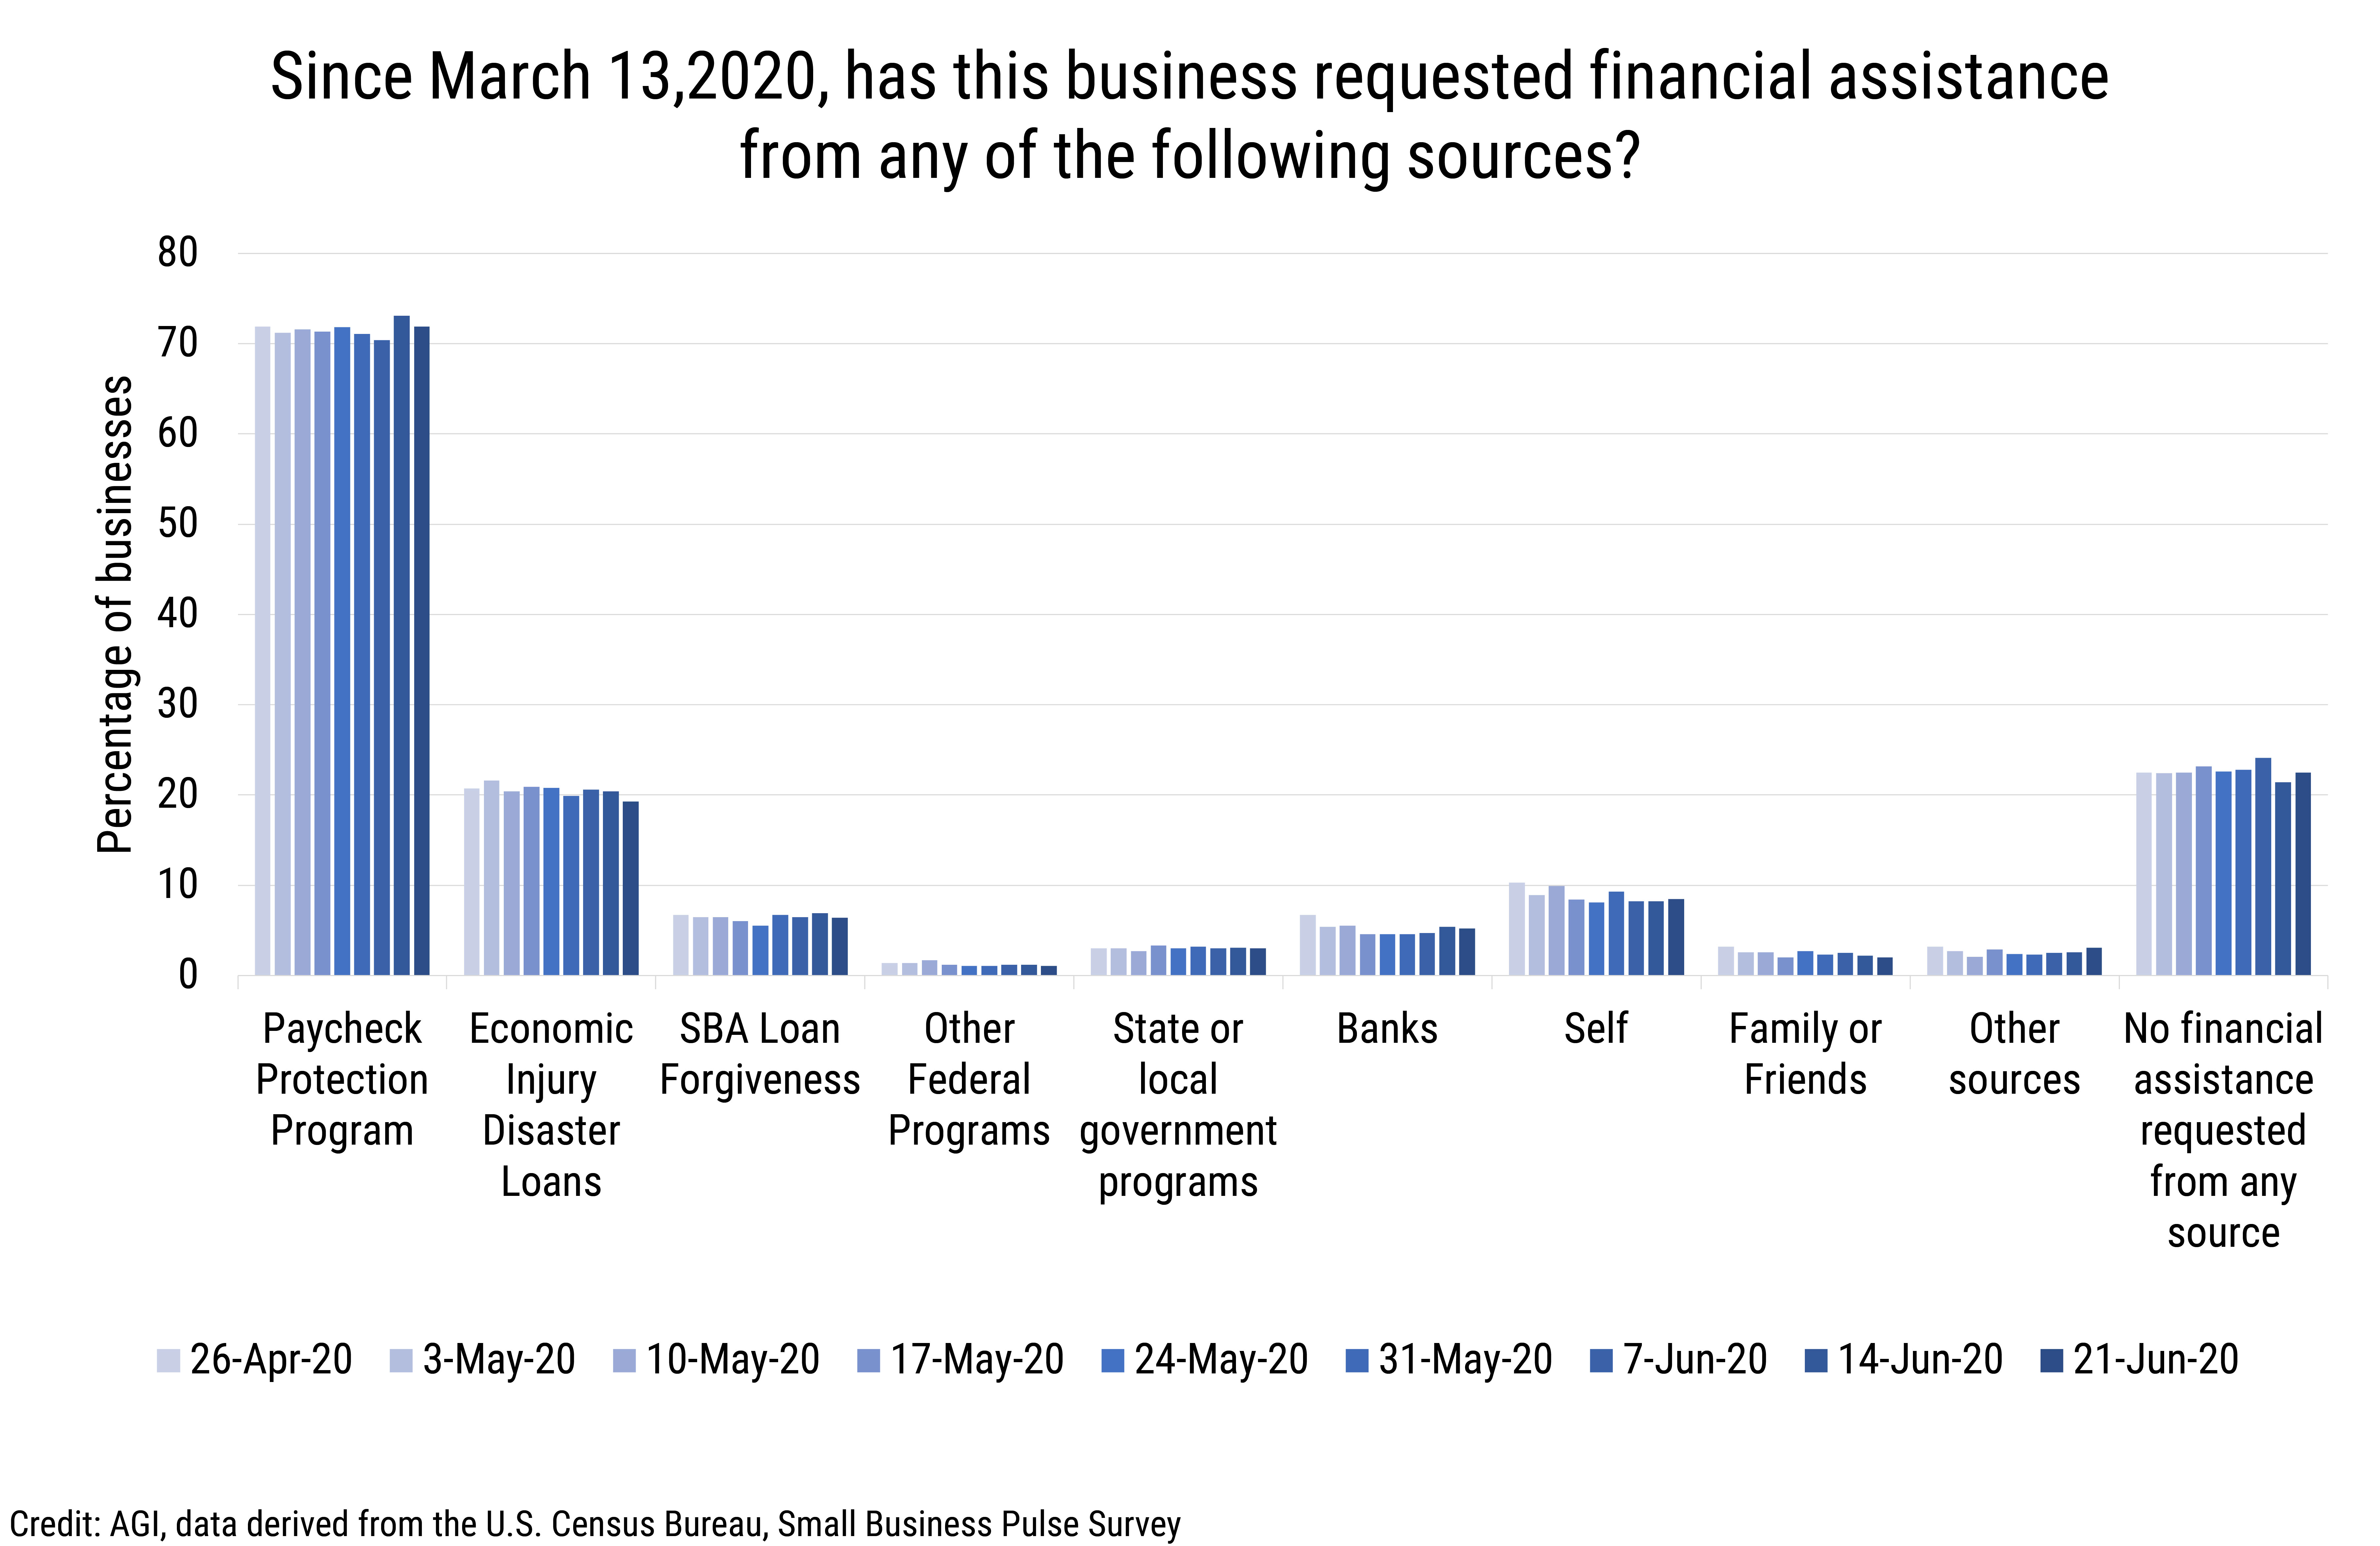 DB_2020-014 chart 02: Sources of Requested Financial Aid (credit: AGI, data derived from the U.S. Census Bureau, Small Business Pulse Survey)